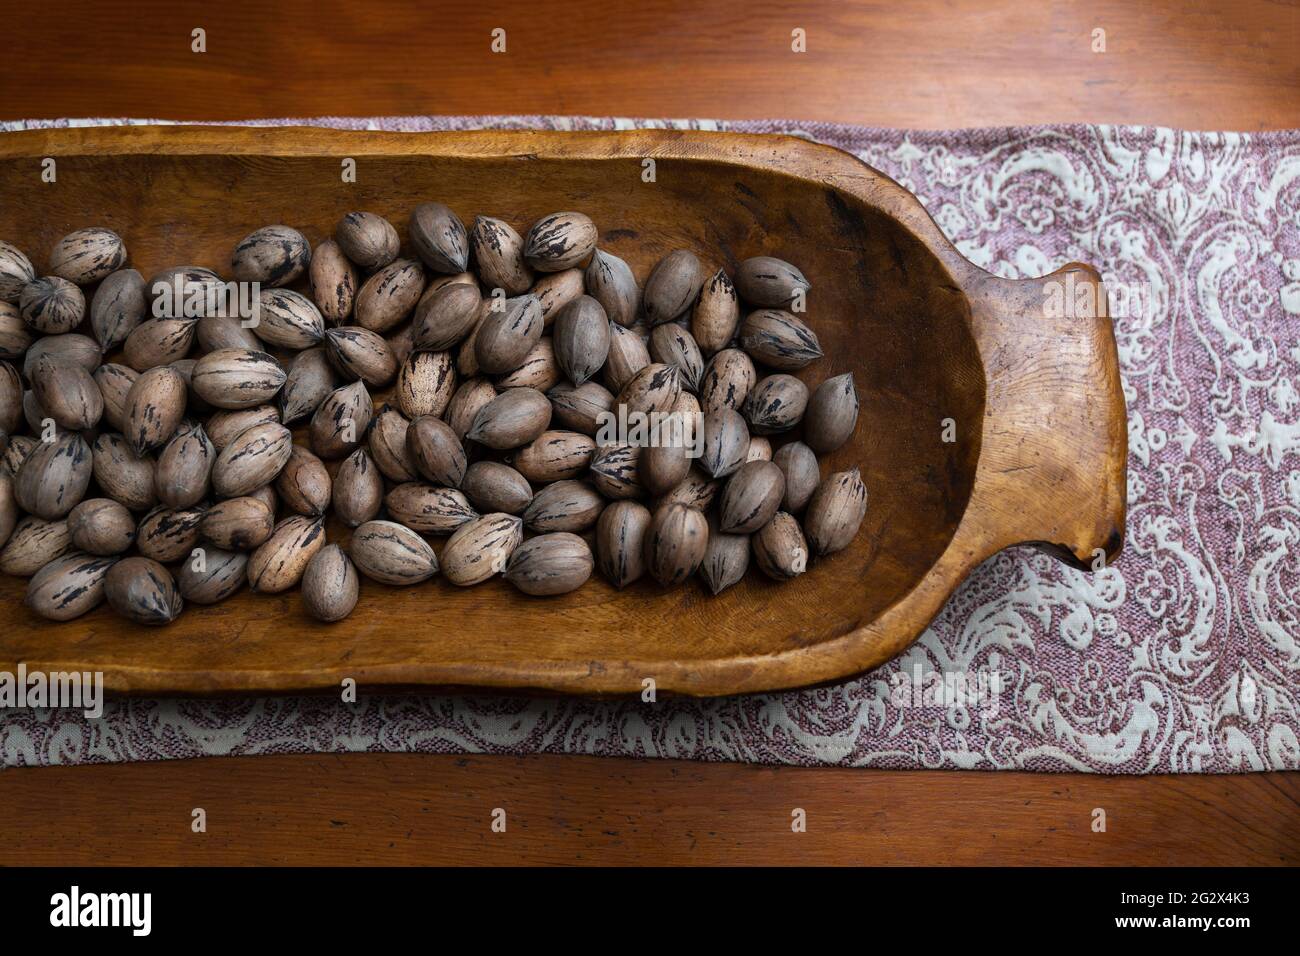 Raw in shell whole Pecan nuts in a wooden bowl on a wood table Stock Photo